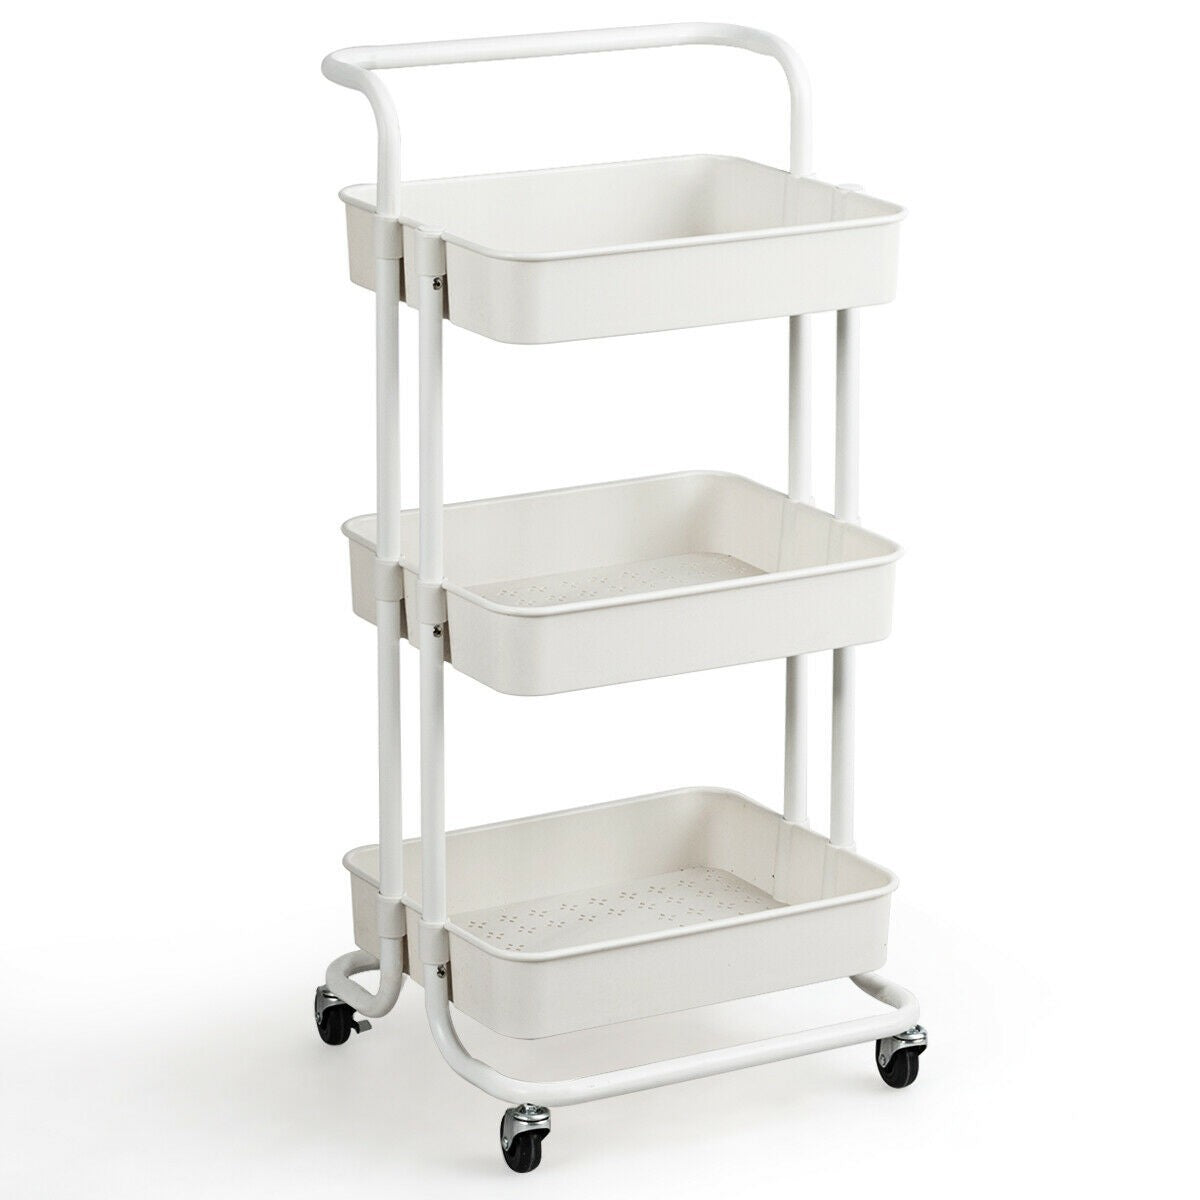 Giantex 3-Tier Utility Cart, ABS Mesh Baskets, Storage Trolley with Brakes for Home and Office 16.5"x14"x34"